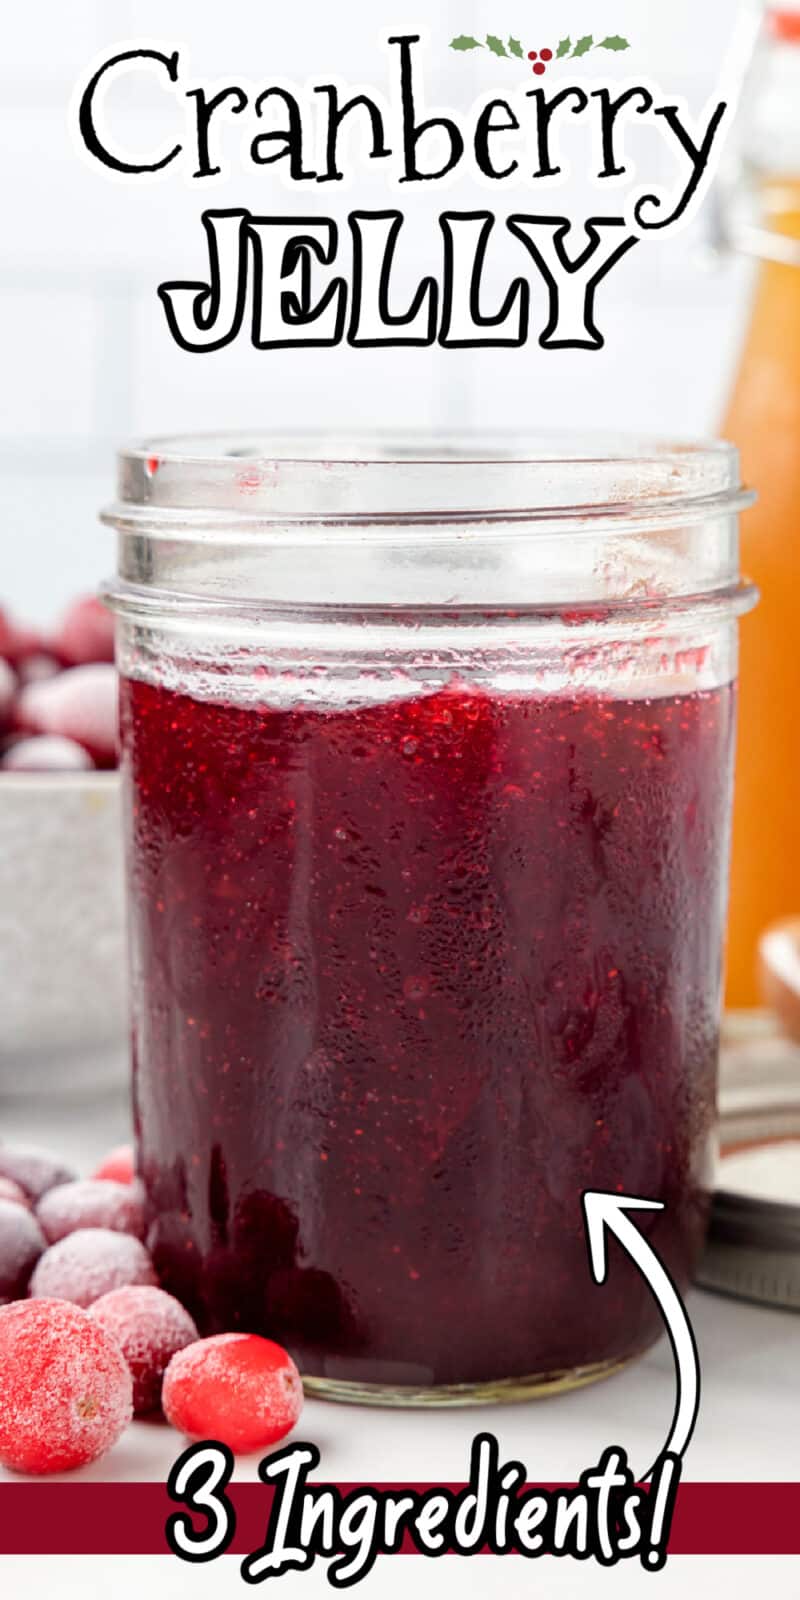 jar of food, with Cranberry Jelly